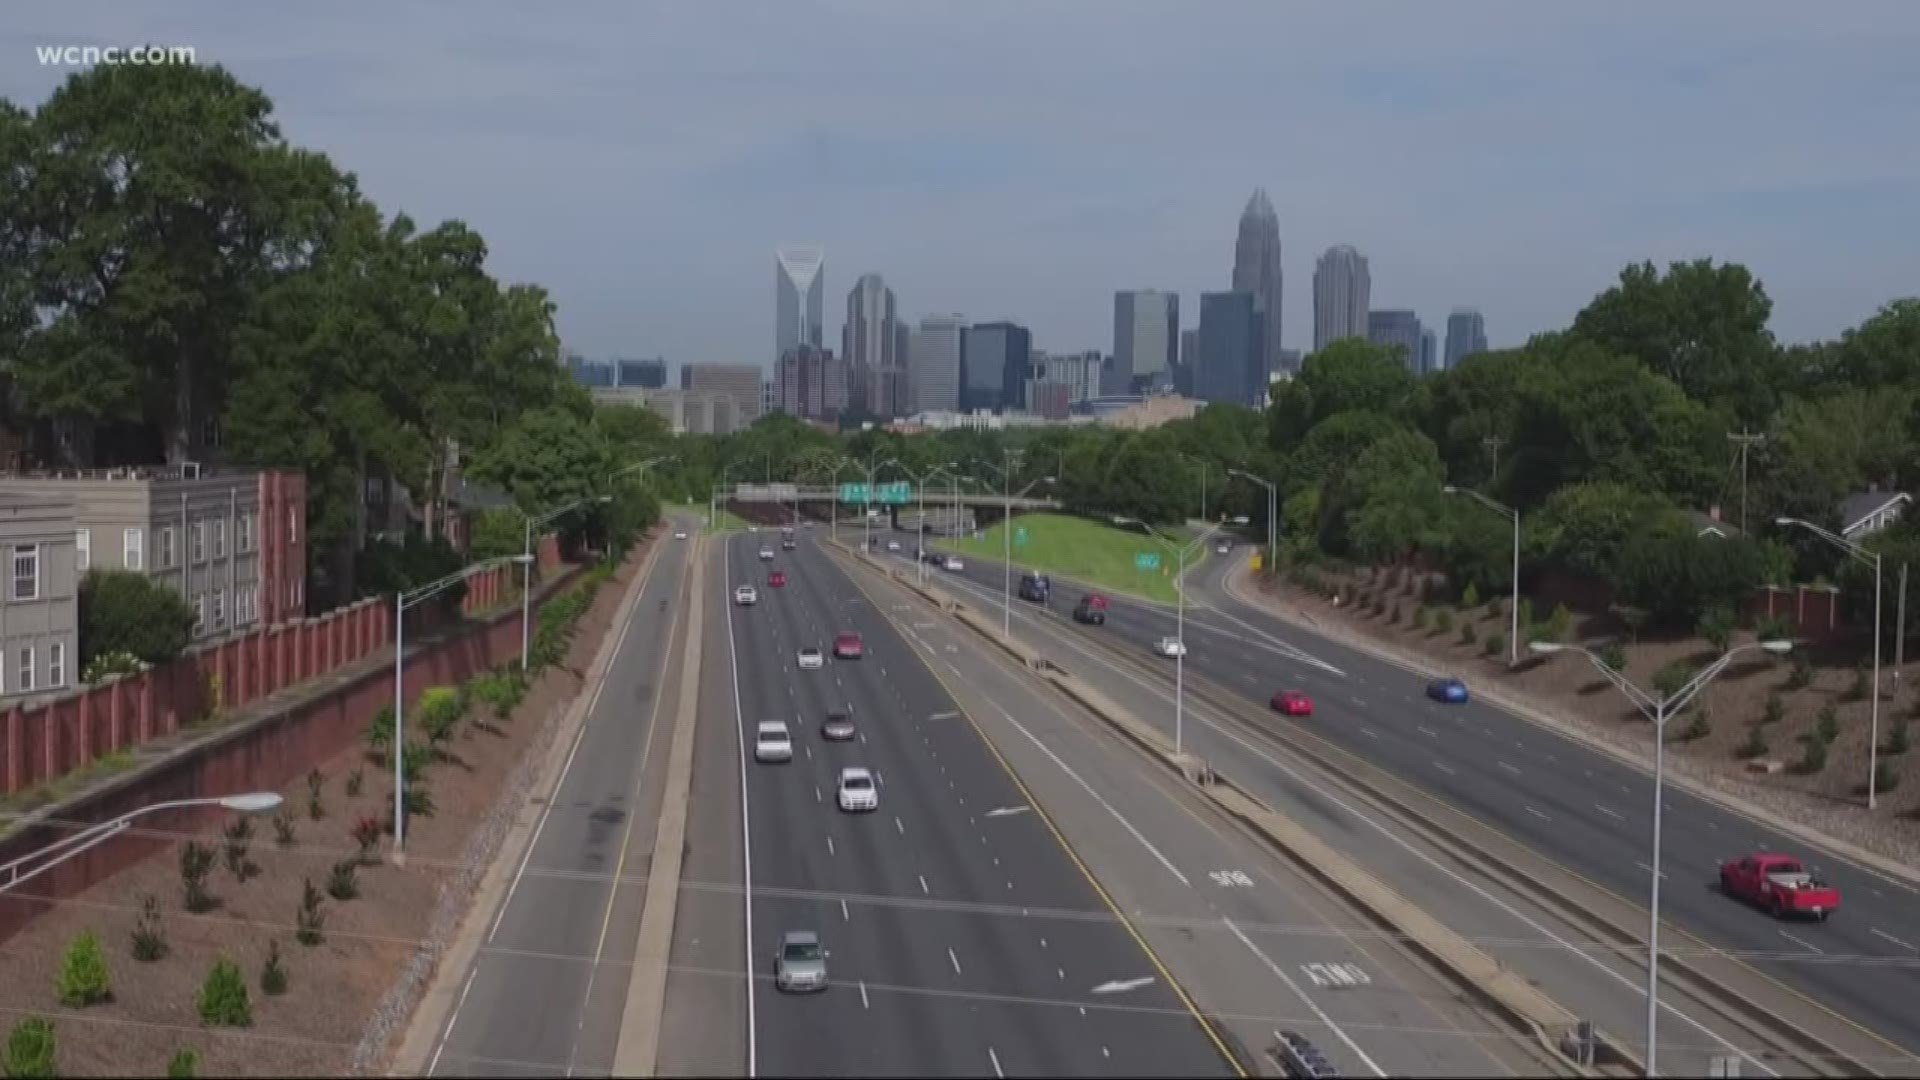 Trending in CLT: Is Charlotte doing enough to deal with the affordable housing crisis?